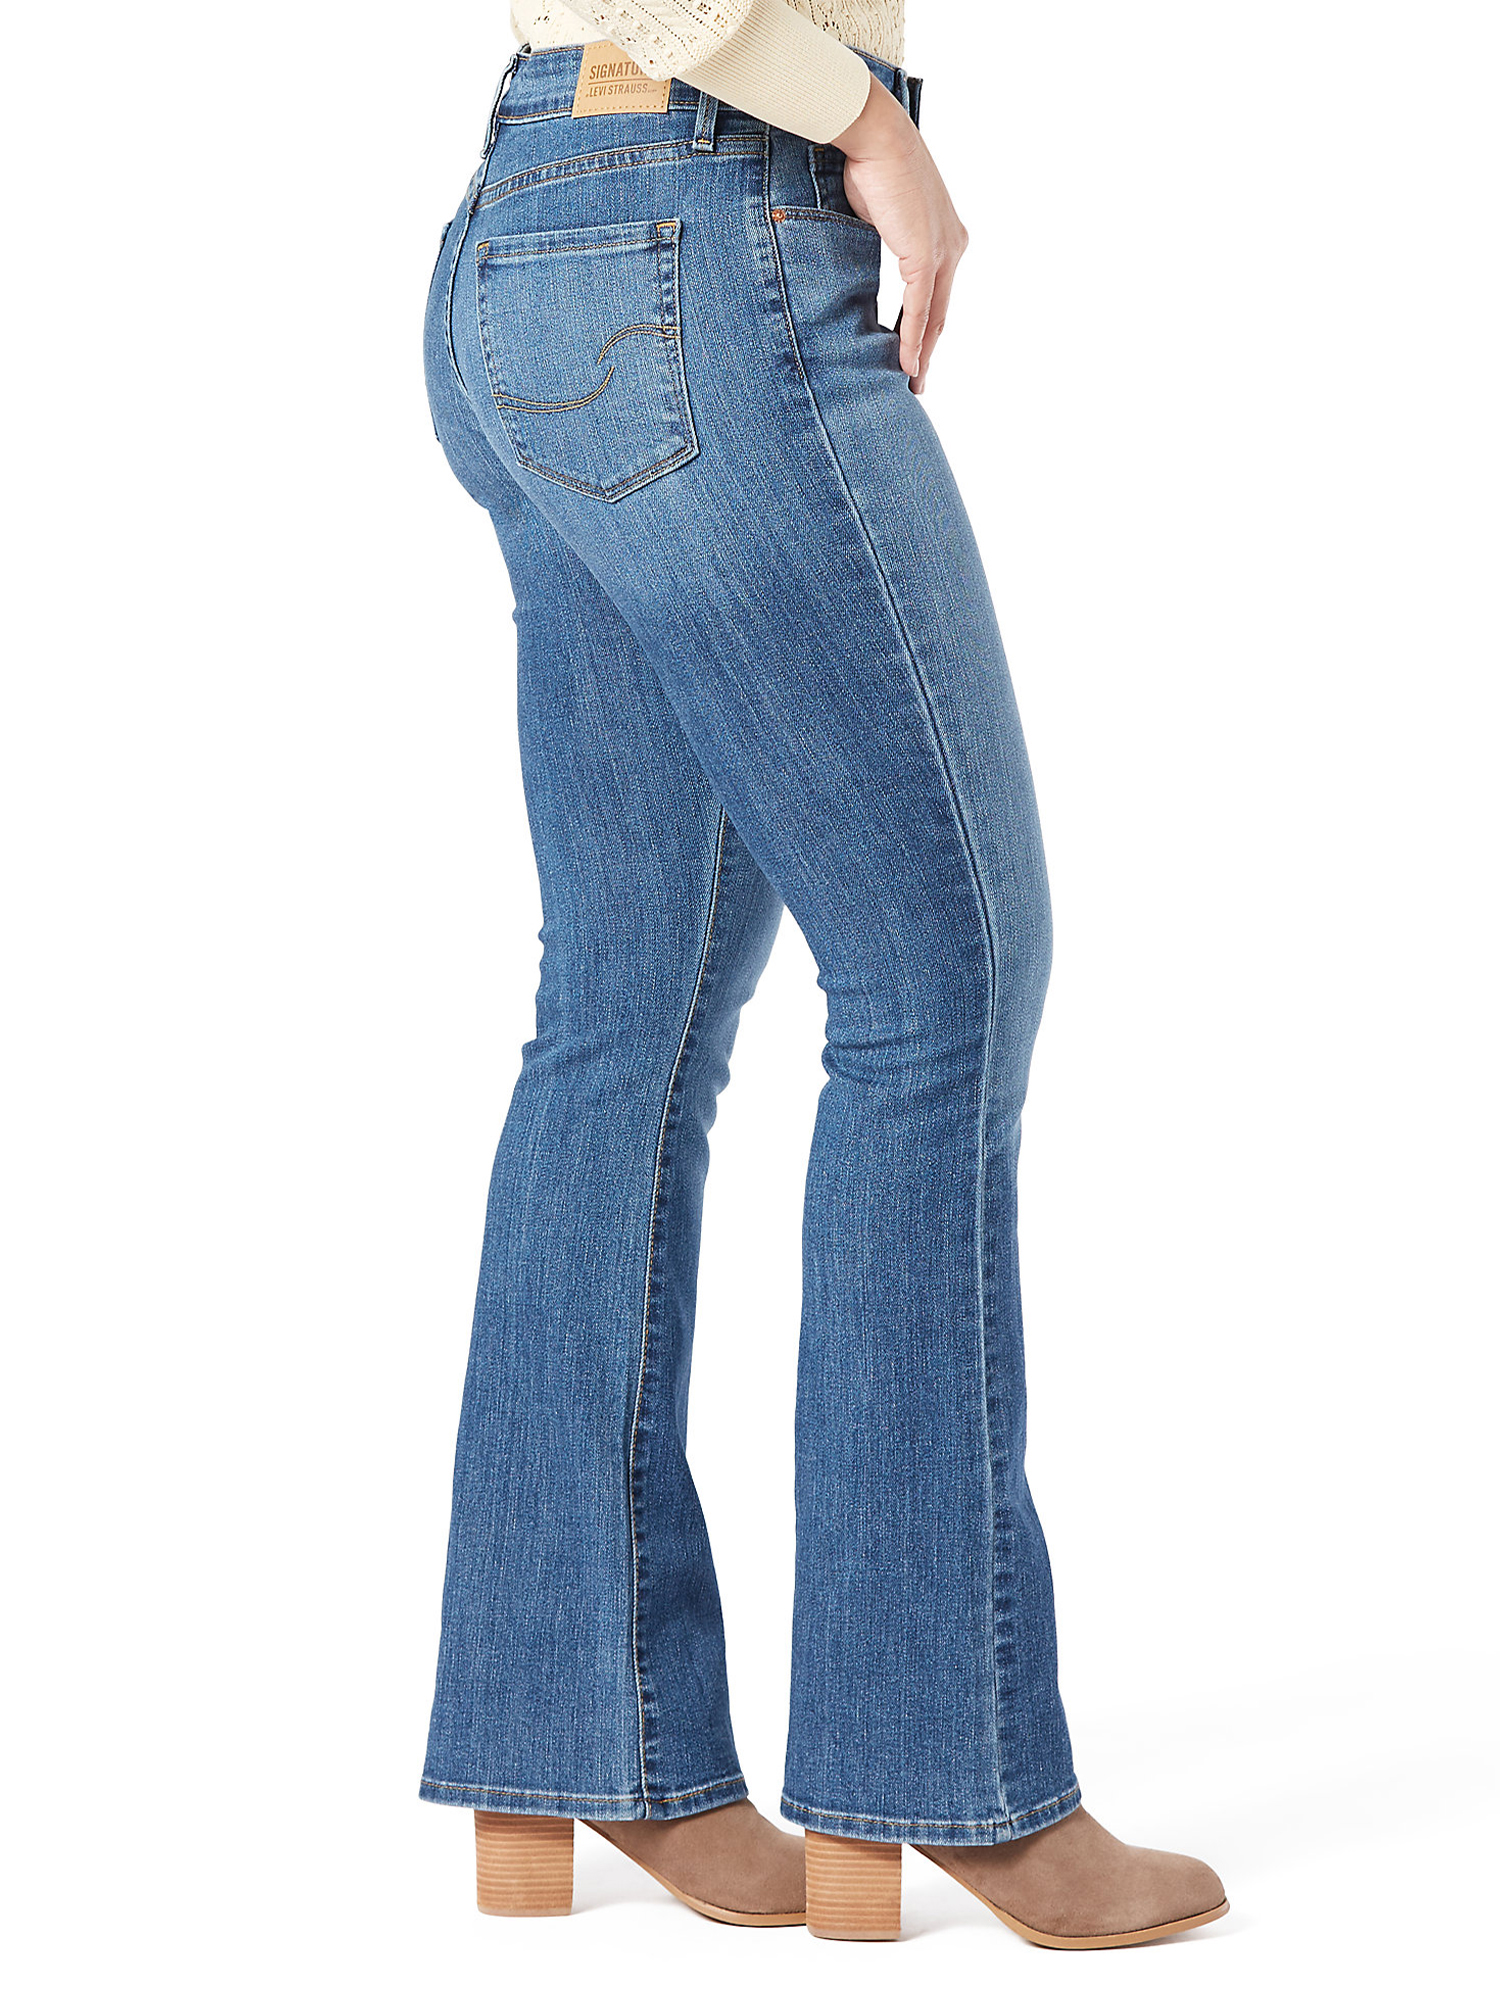 Signature by Levi Strauss & Co. Women's and Women's Plus Modern Bootcut Jeans - image 4 of 7